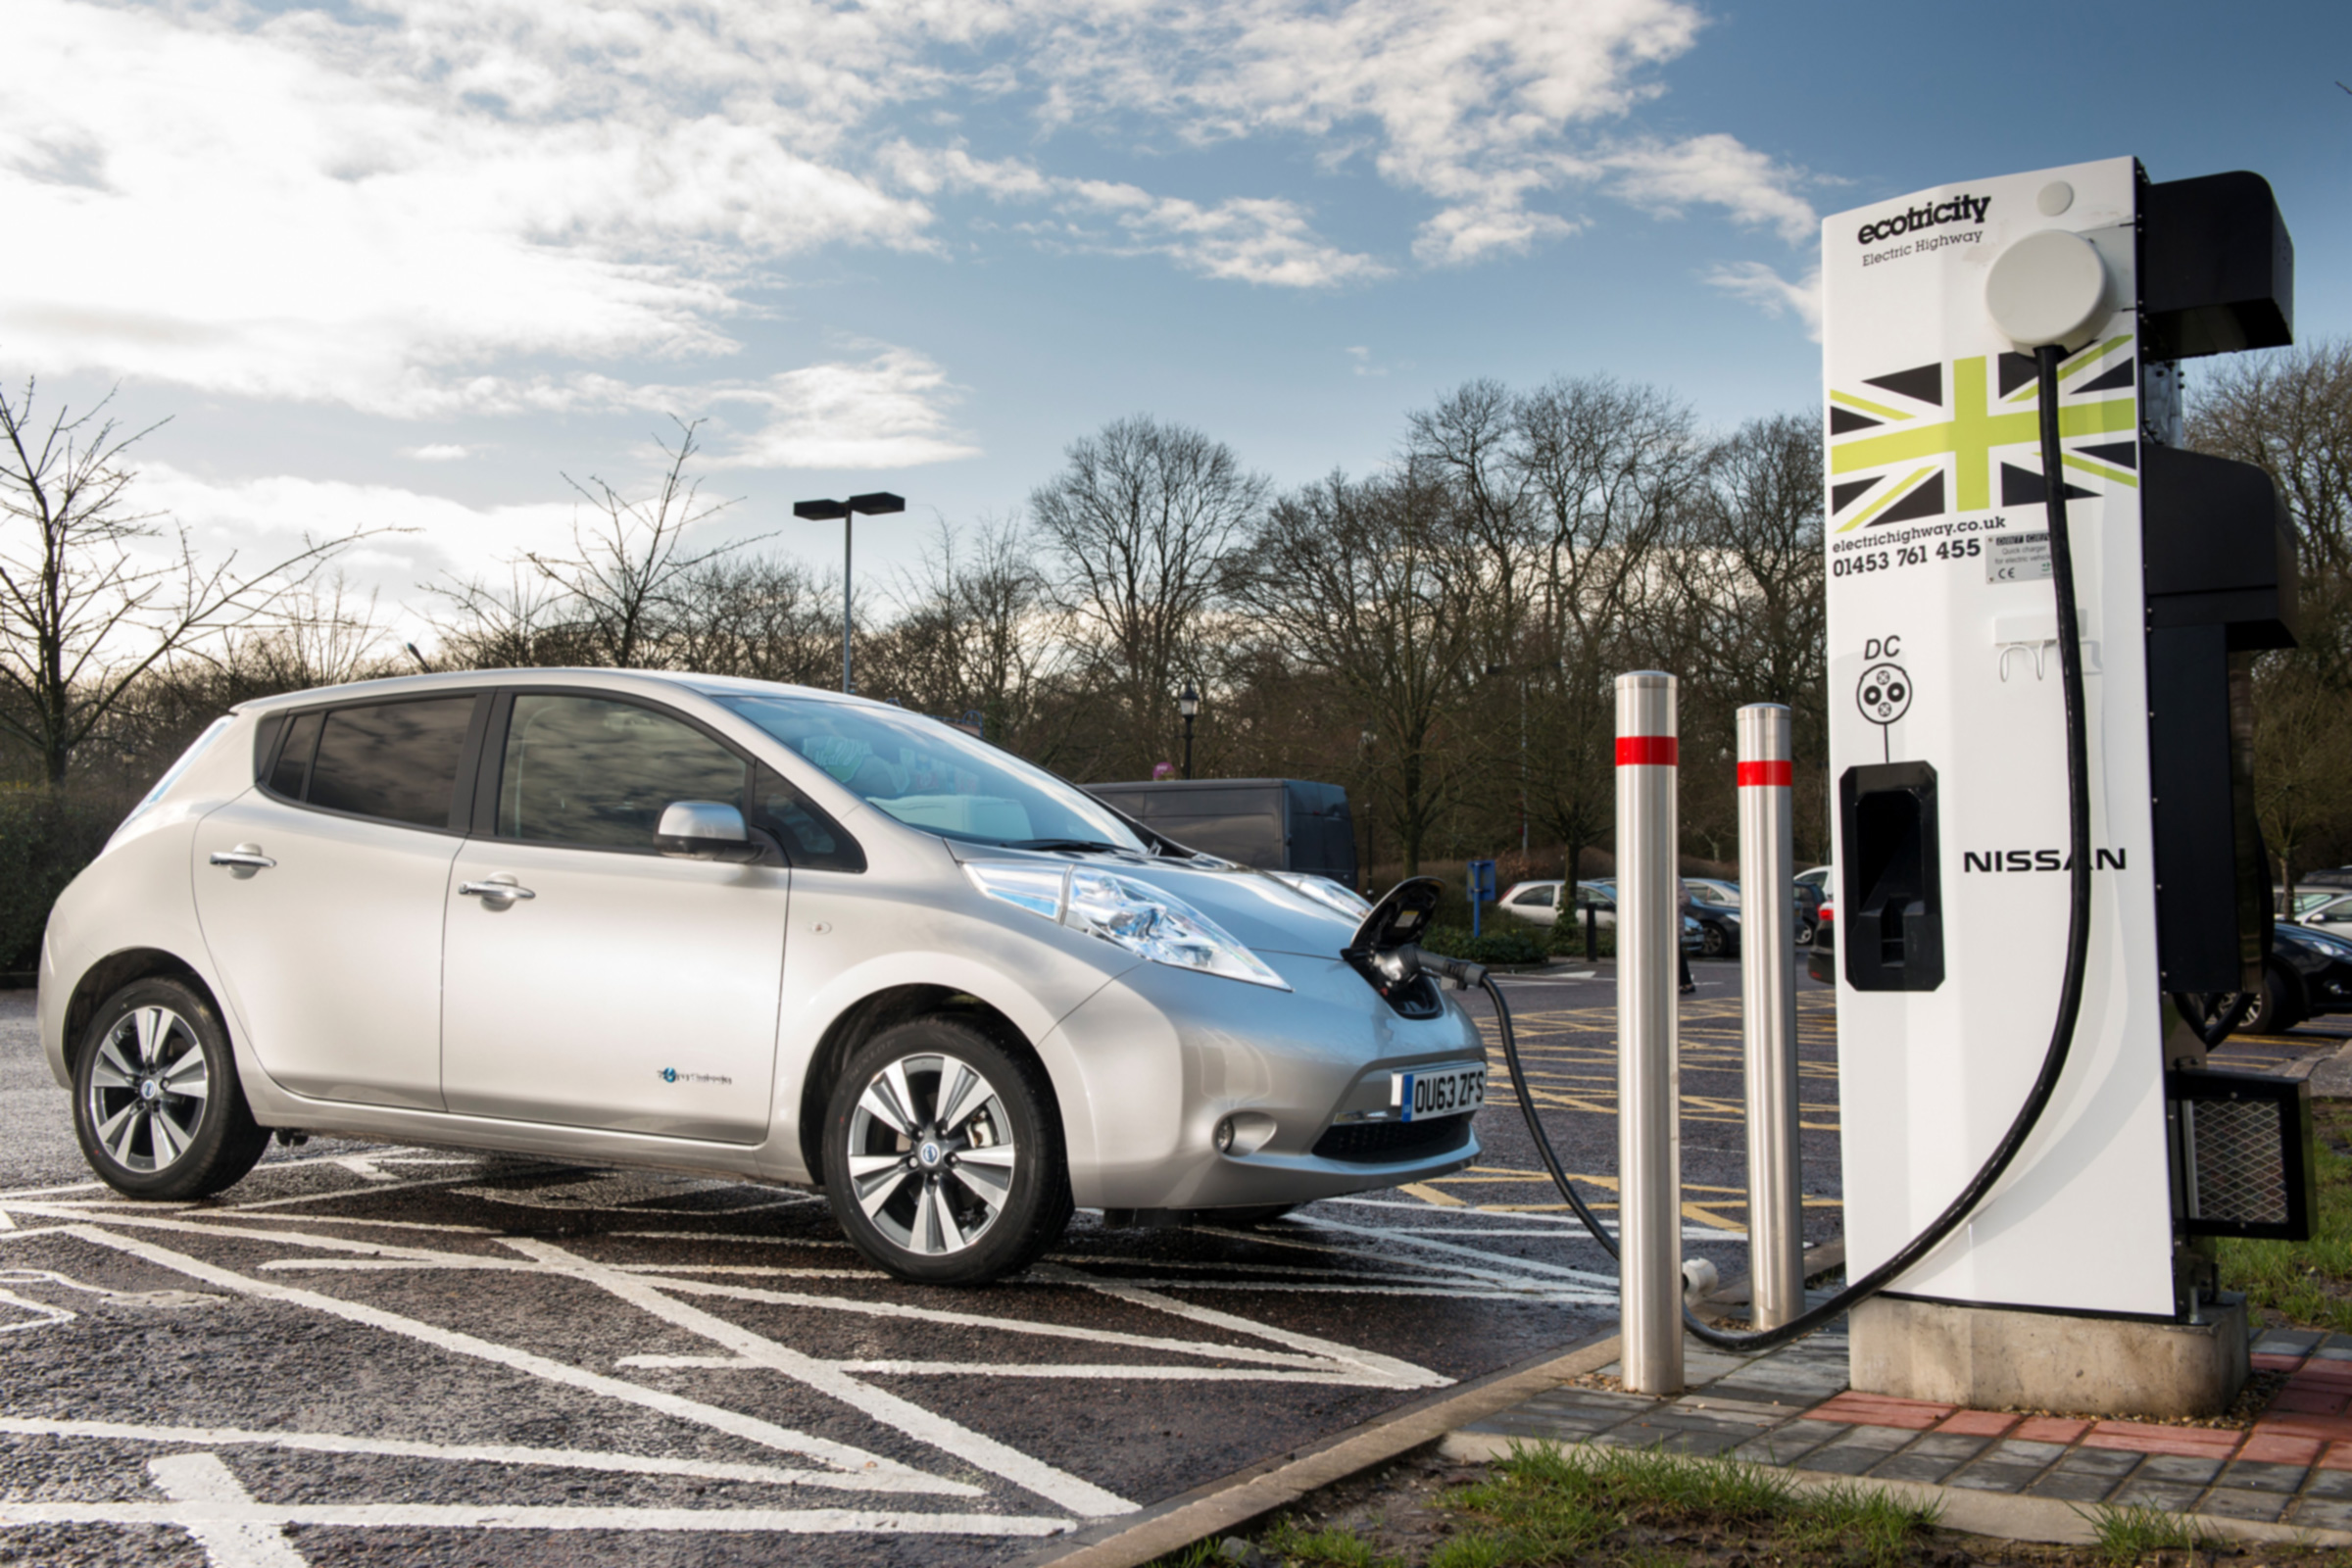 Electric car charging in the UK: prices, networks, charger 